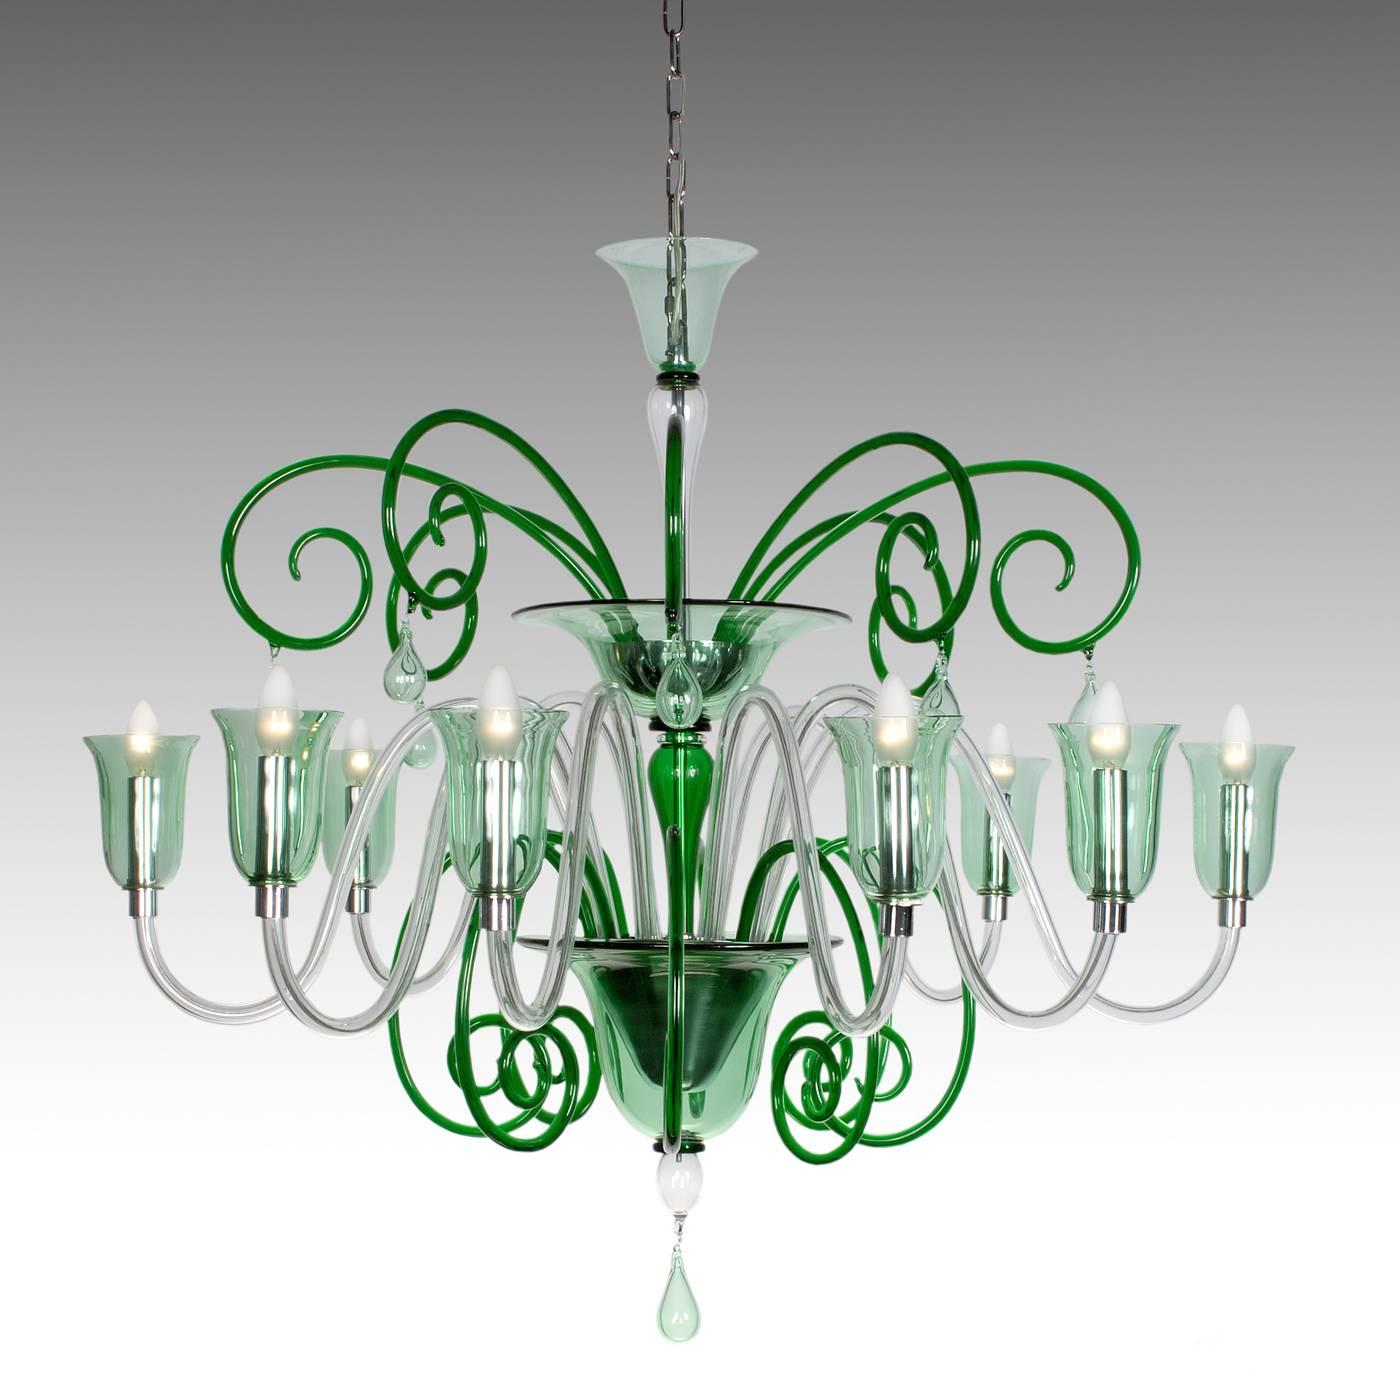 This Murano glass eight-light chandelier is entirely mouth-blown and has a contemporary flair, thanks to the striking green color of the glass of the lights and the decoration that complements the simple clear glass of the eight arms.